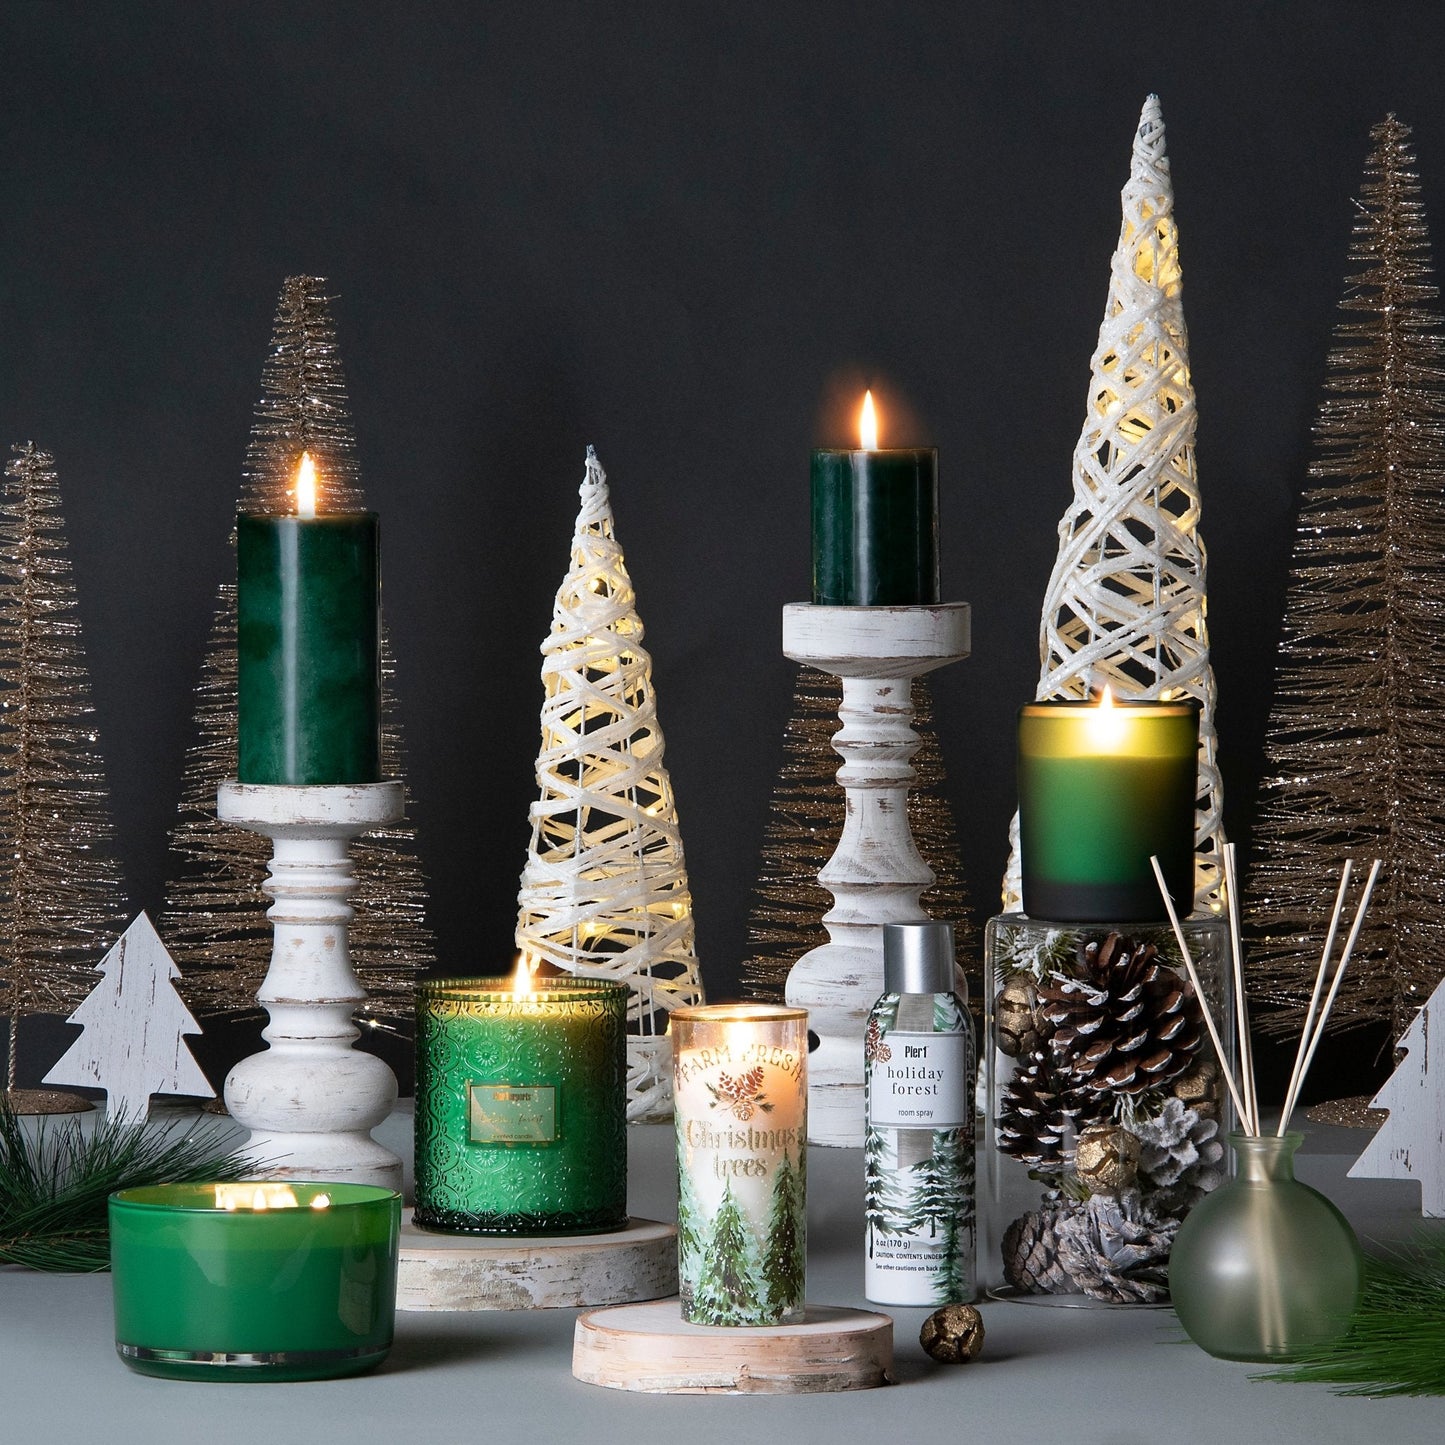 Pier 1 Holiday Forest 3x4 Mottled Pillar Candle - Pier 1